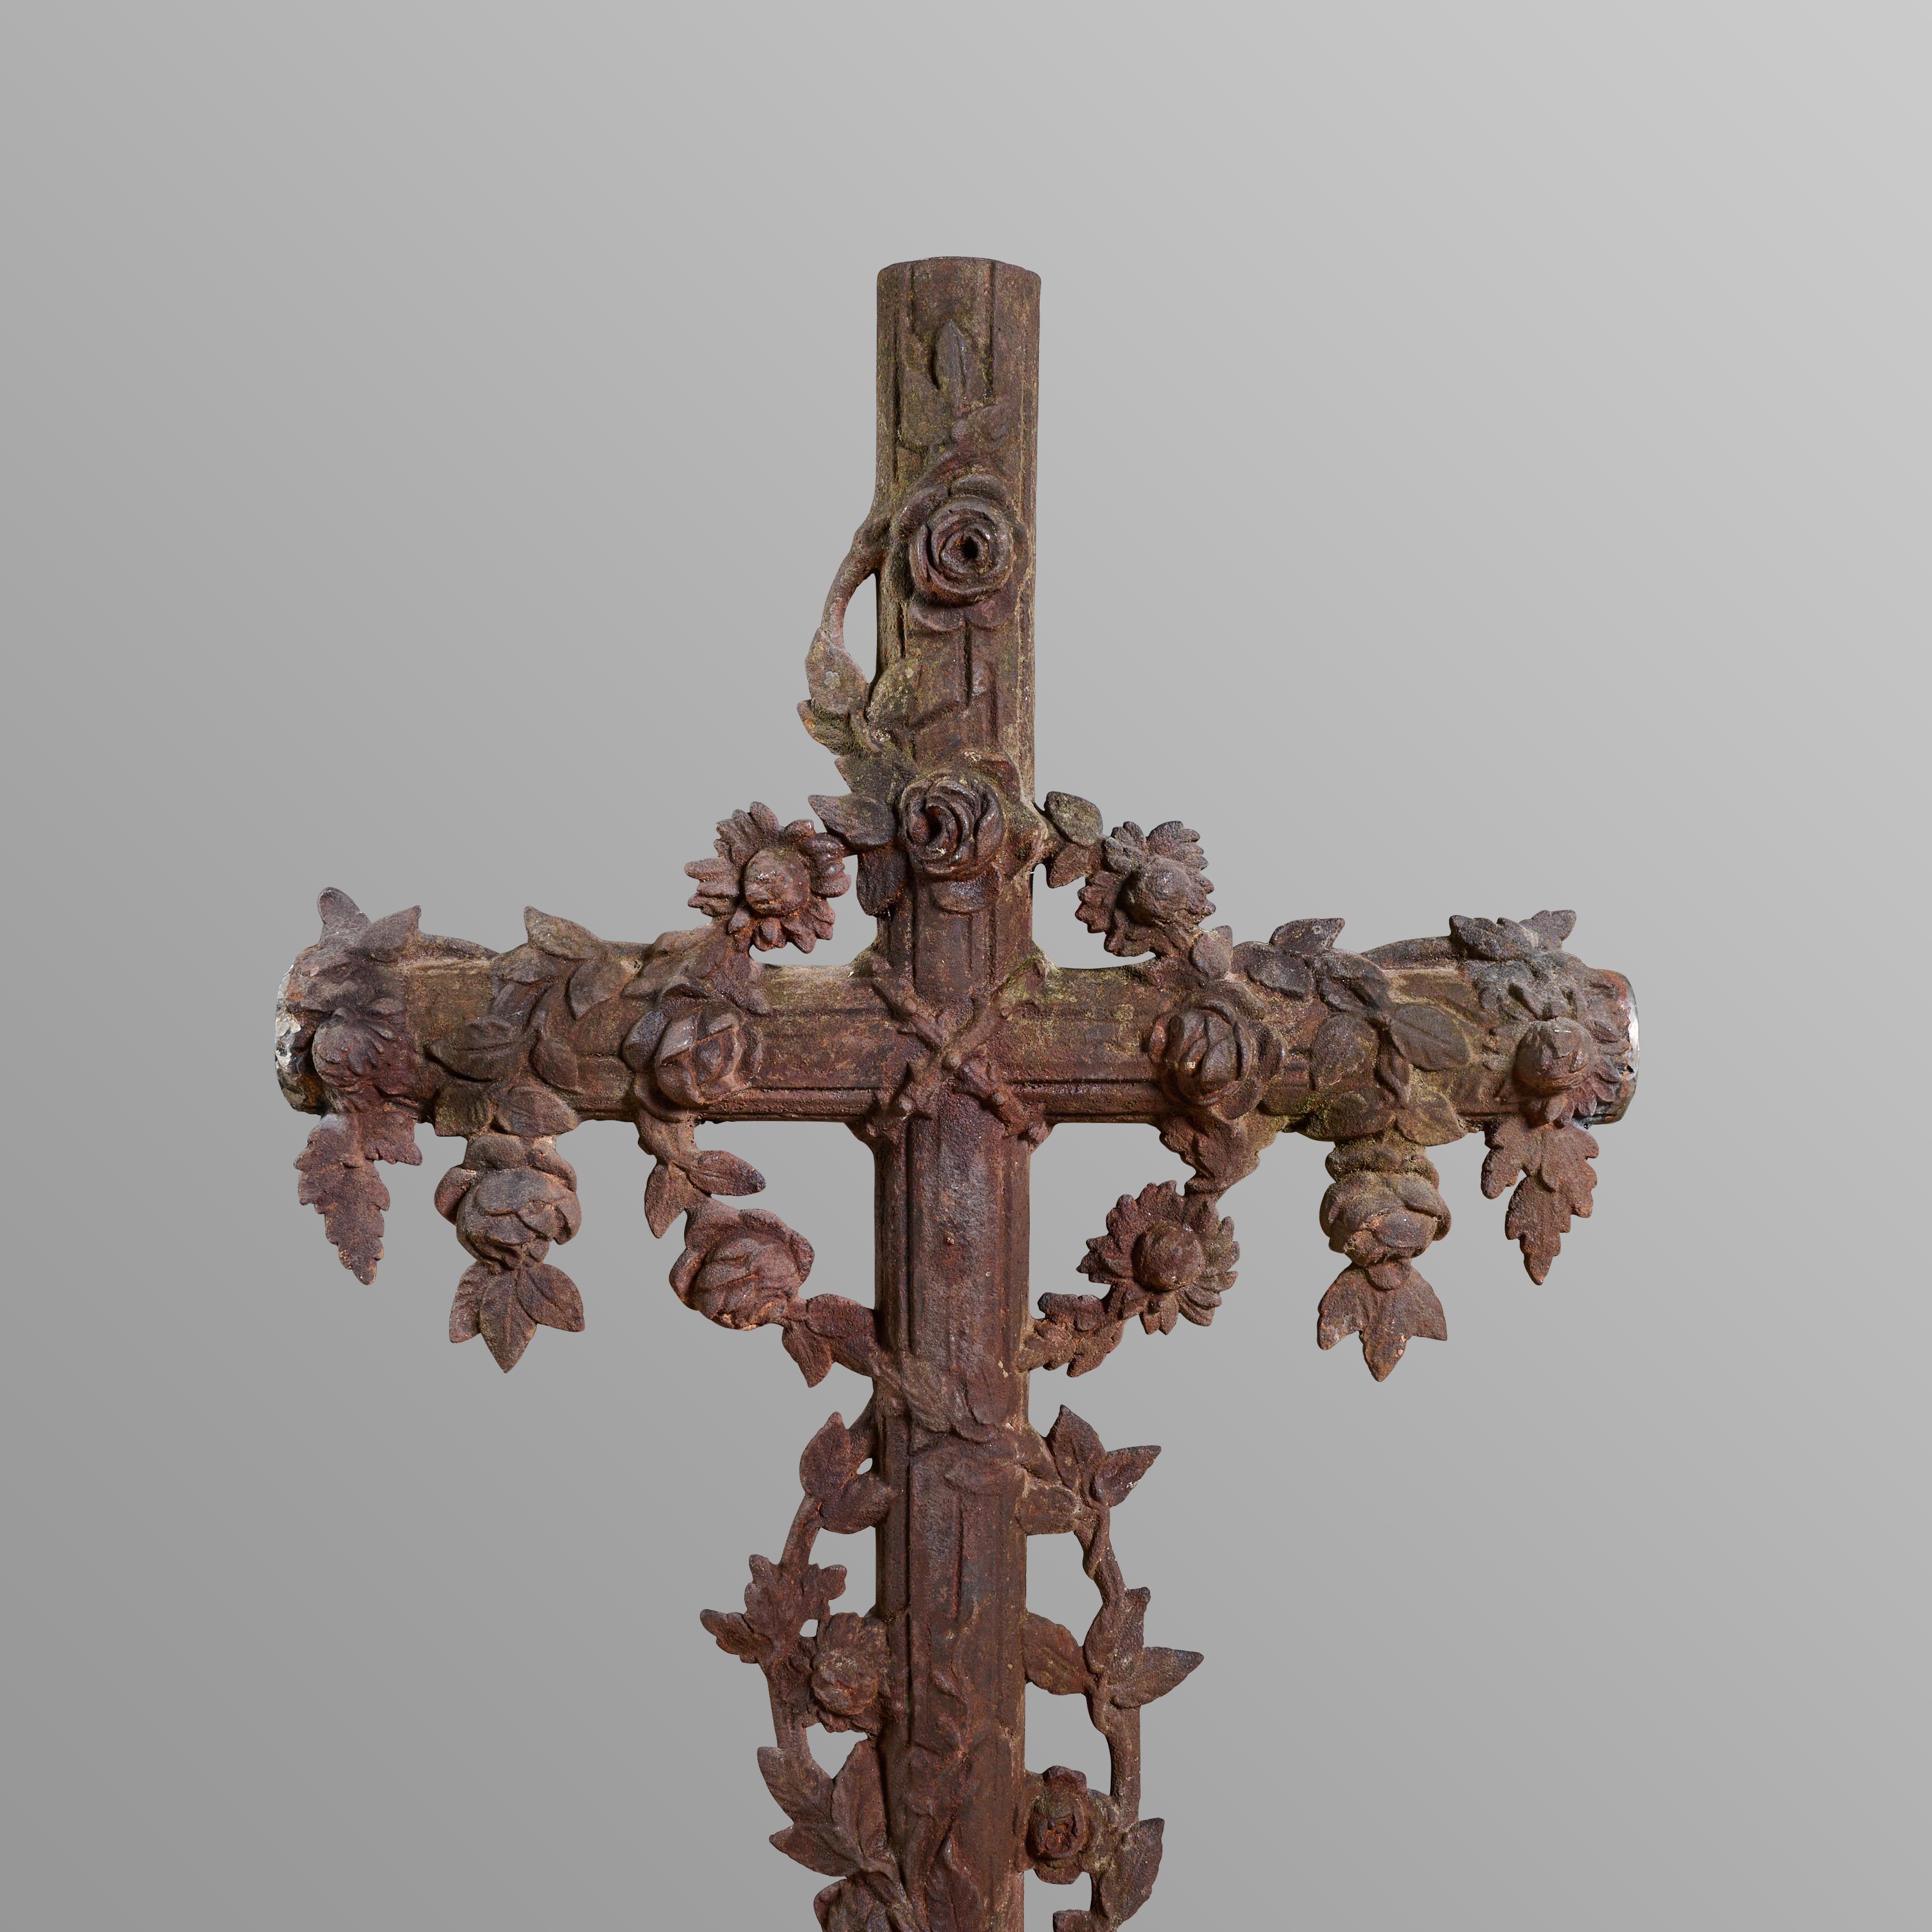 Cast iron crucifix. Great casting and quality.

